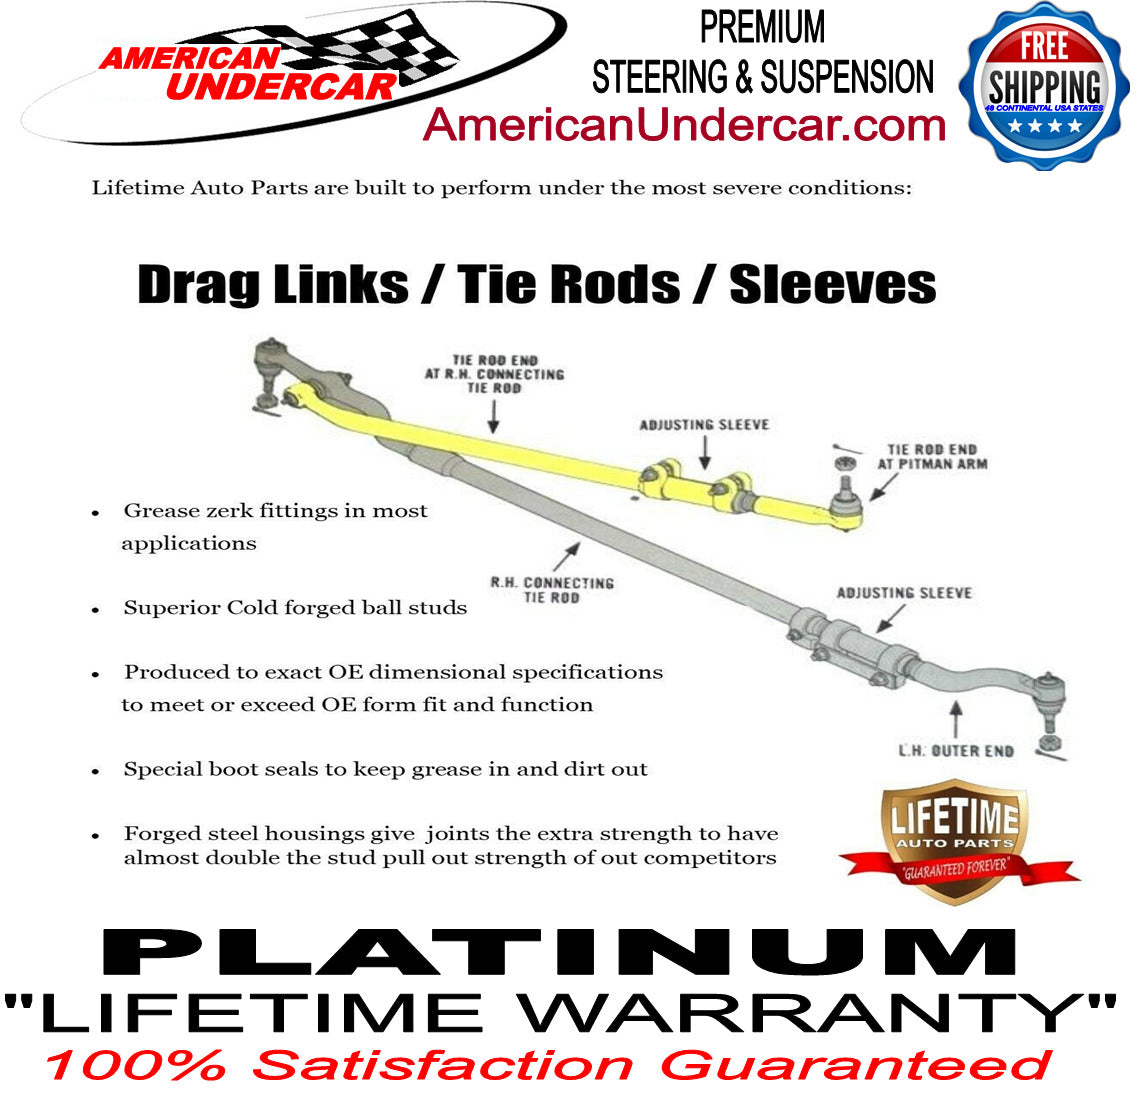 Lifetime Ball Joint Drag Link Tie Rod Steering Kit for 2008-2010 Ford F250, F350 Super Duty 4x4